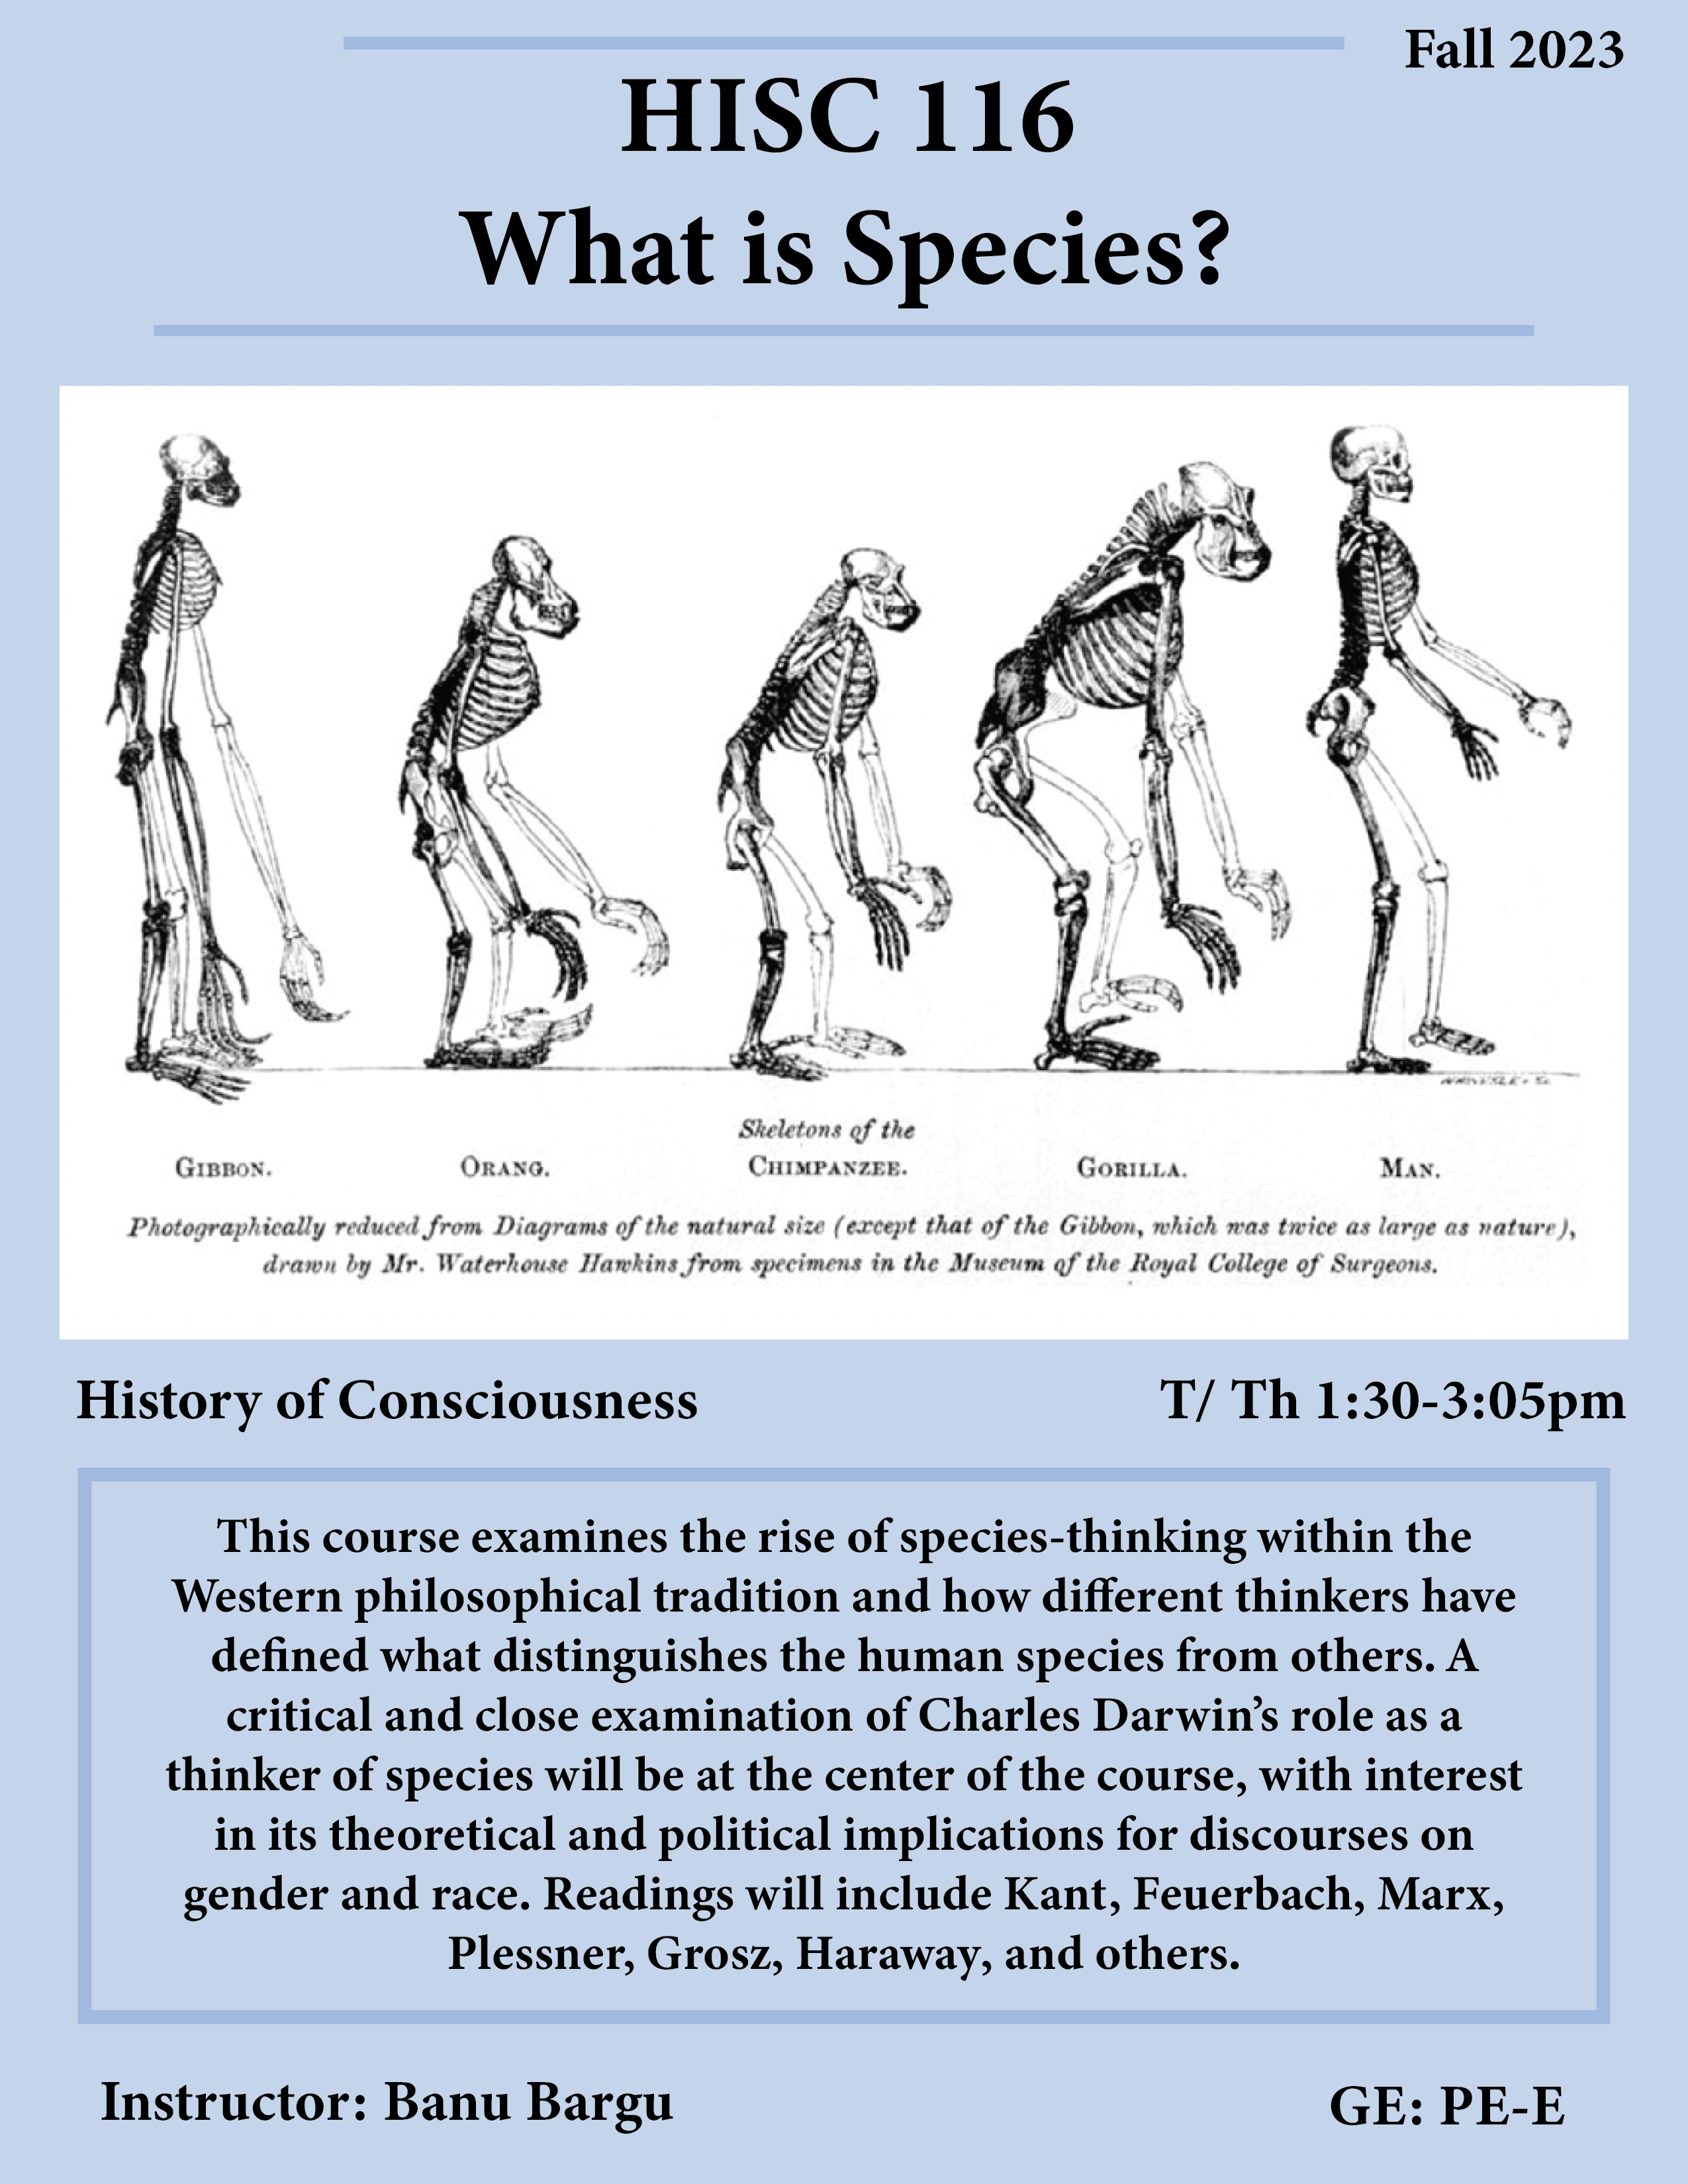 HISC 116: What is Species?